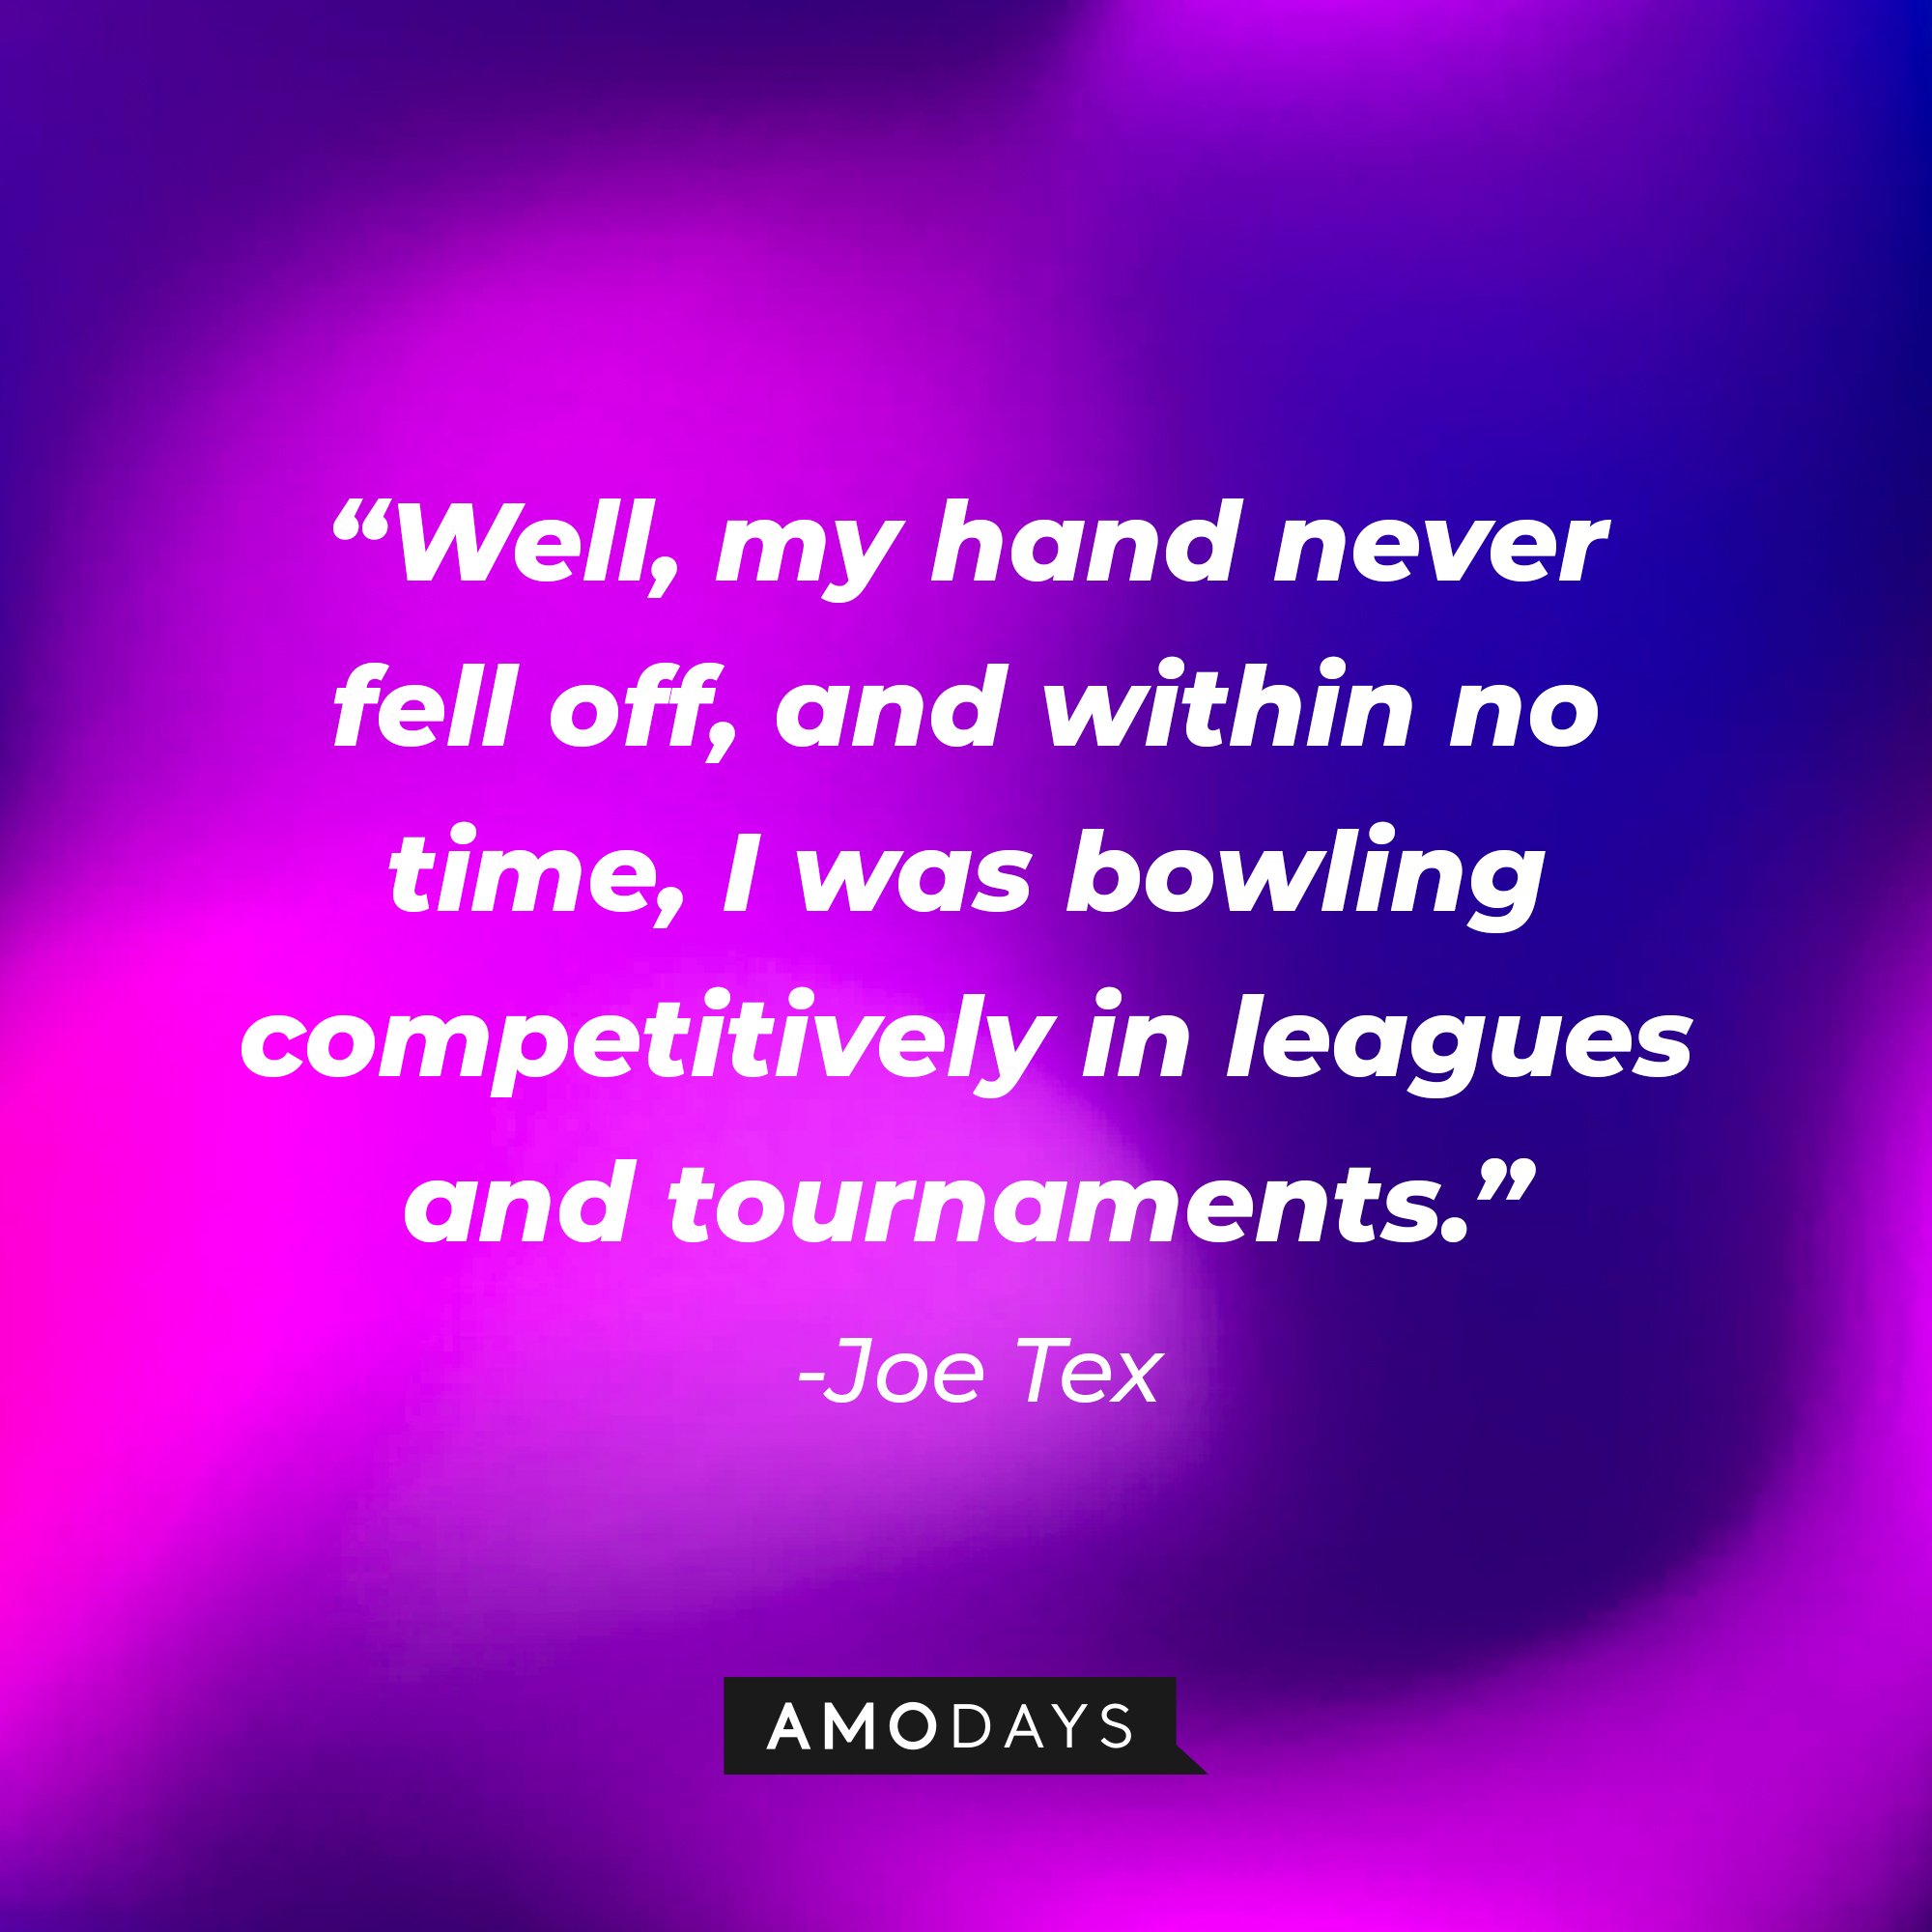 Joe Tex's quote: "Well, my hand never fell off, and within no time, I was bowling competitively in leagues and tournaments." | Image: AmoDays